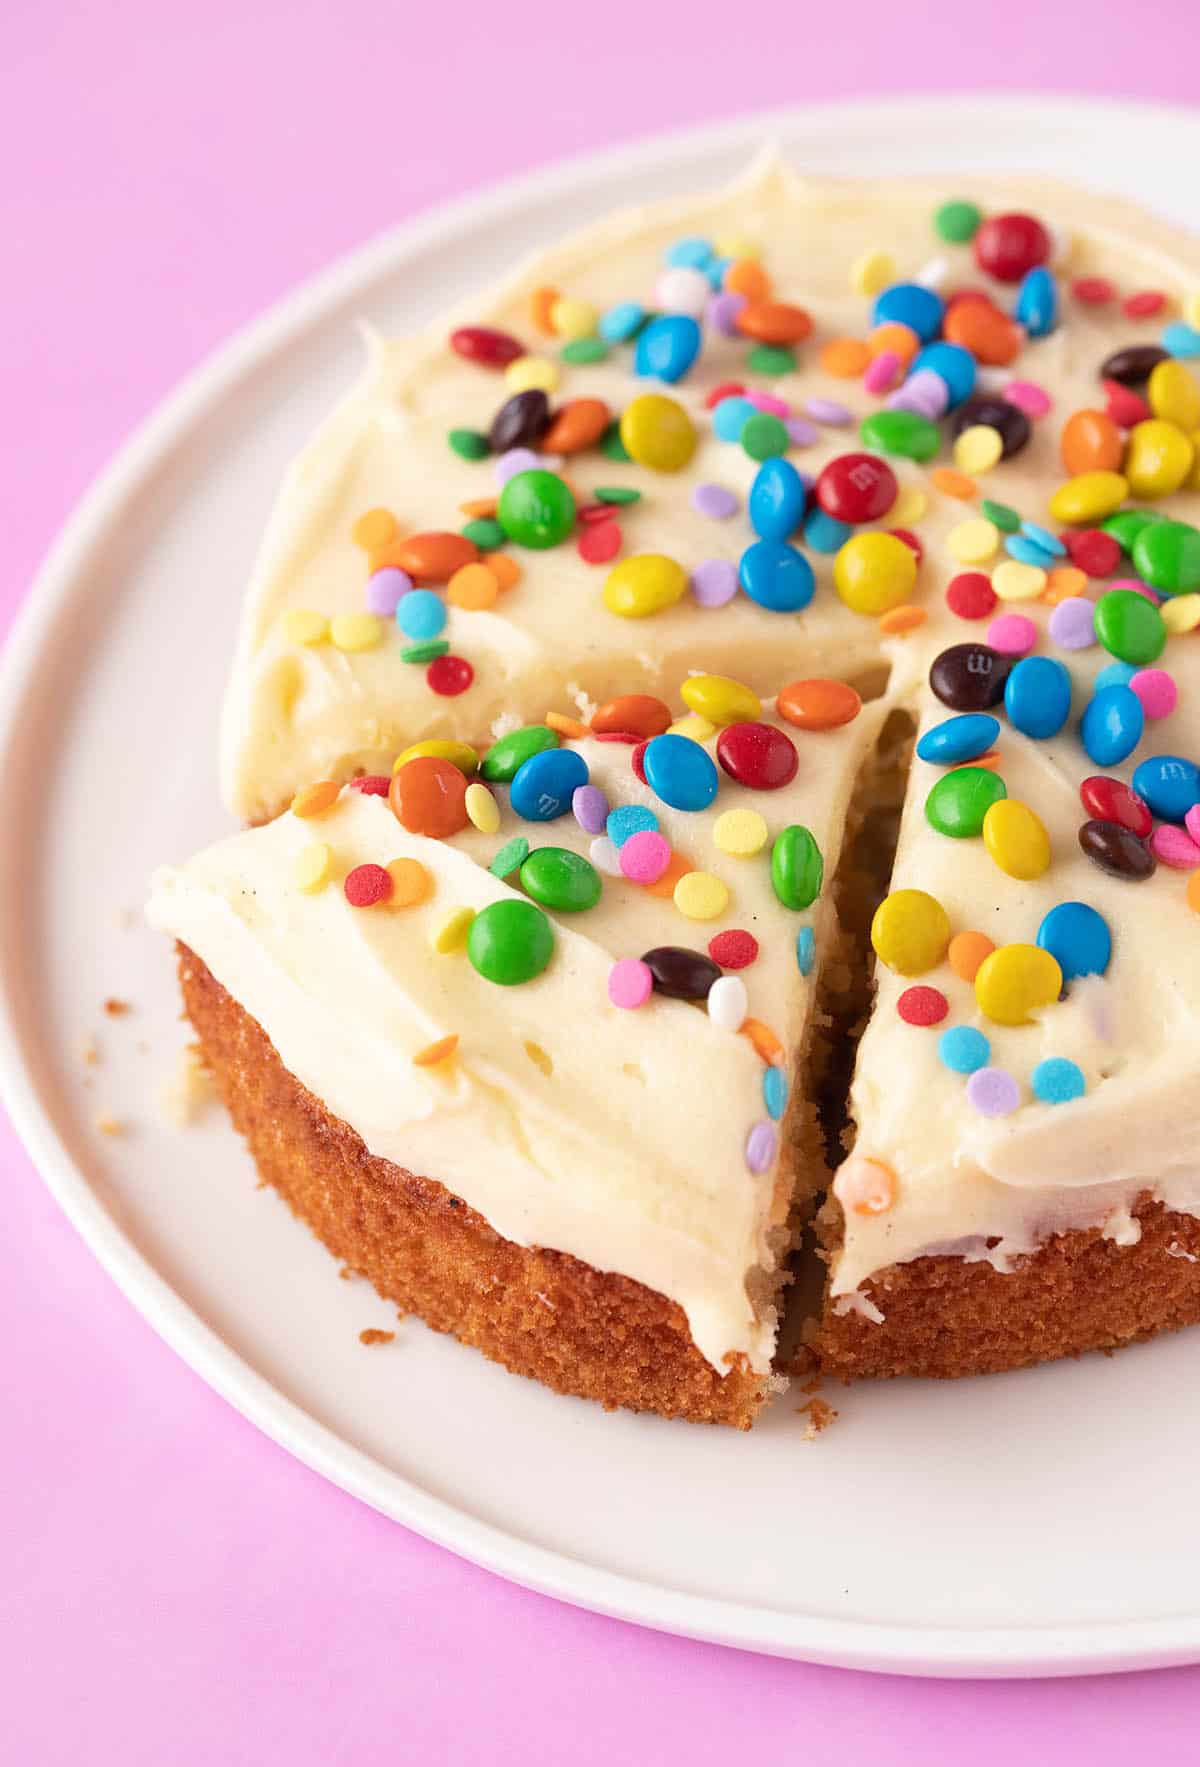 A beautiful one layer Small Vanilla Cake decorated with mini M&M's and sprinkles.